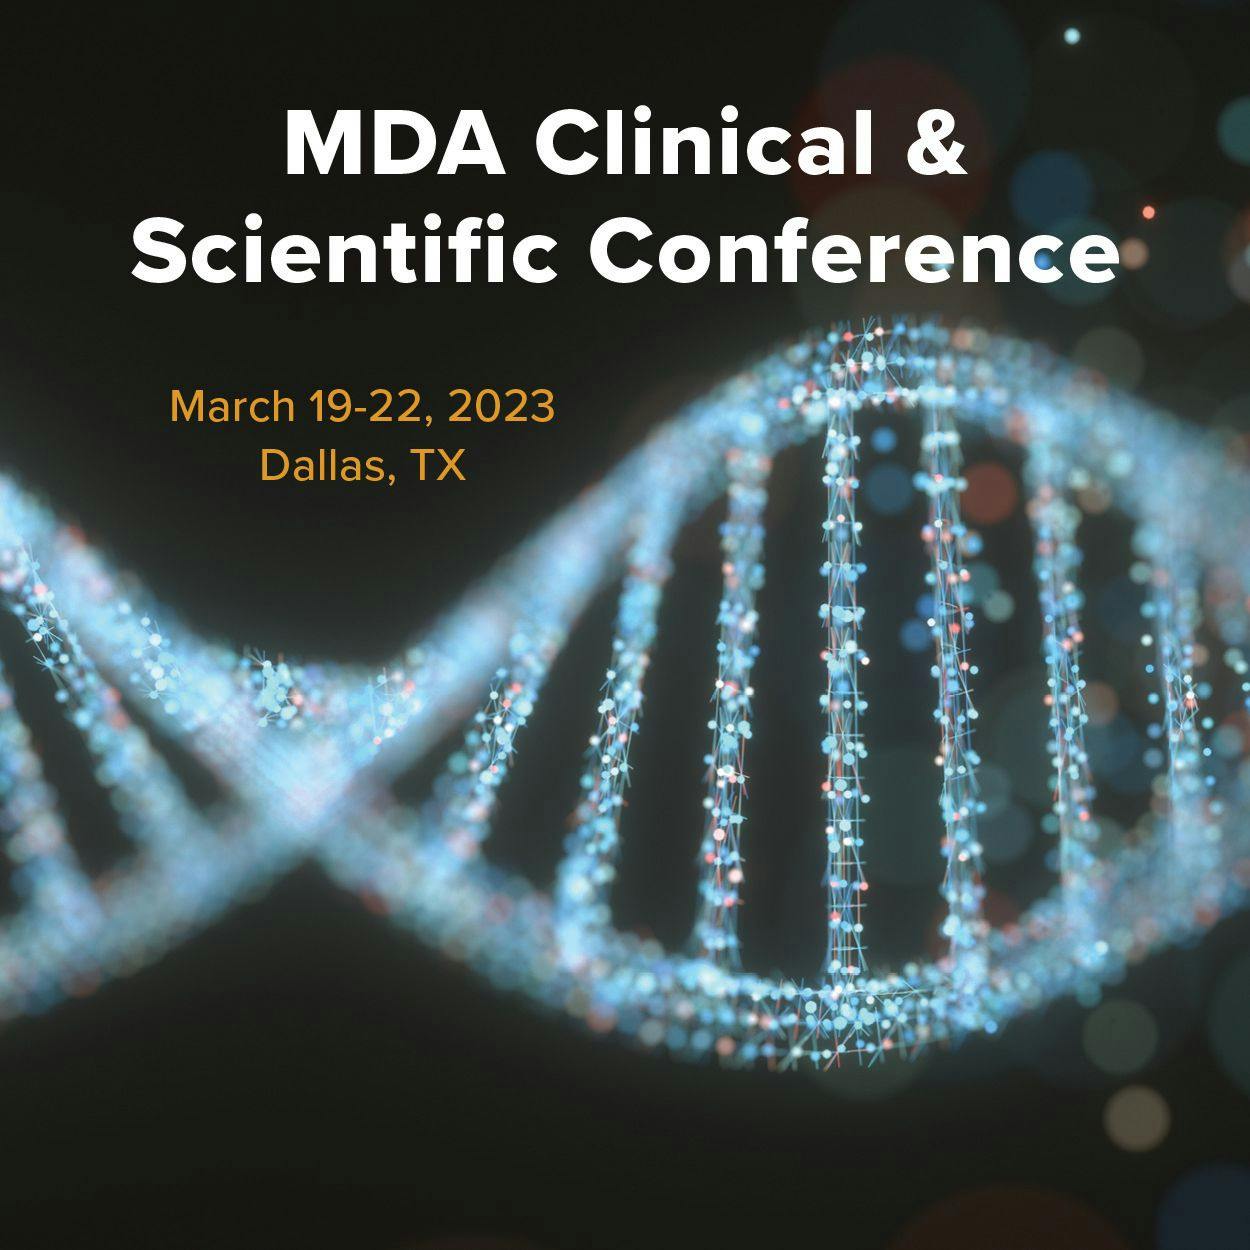 Recapping Research From 2023 MDA Clinical and Scientific Conference